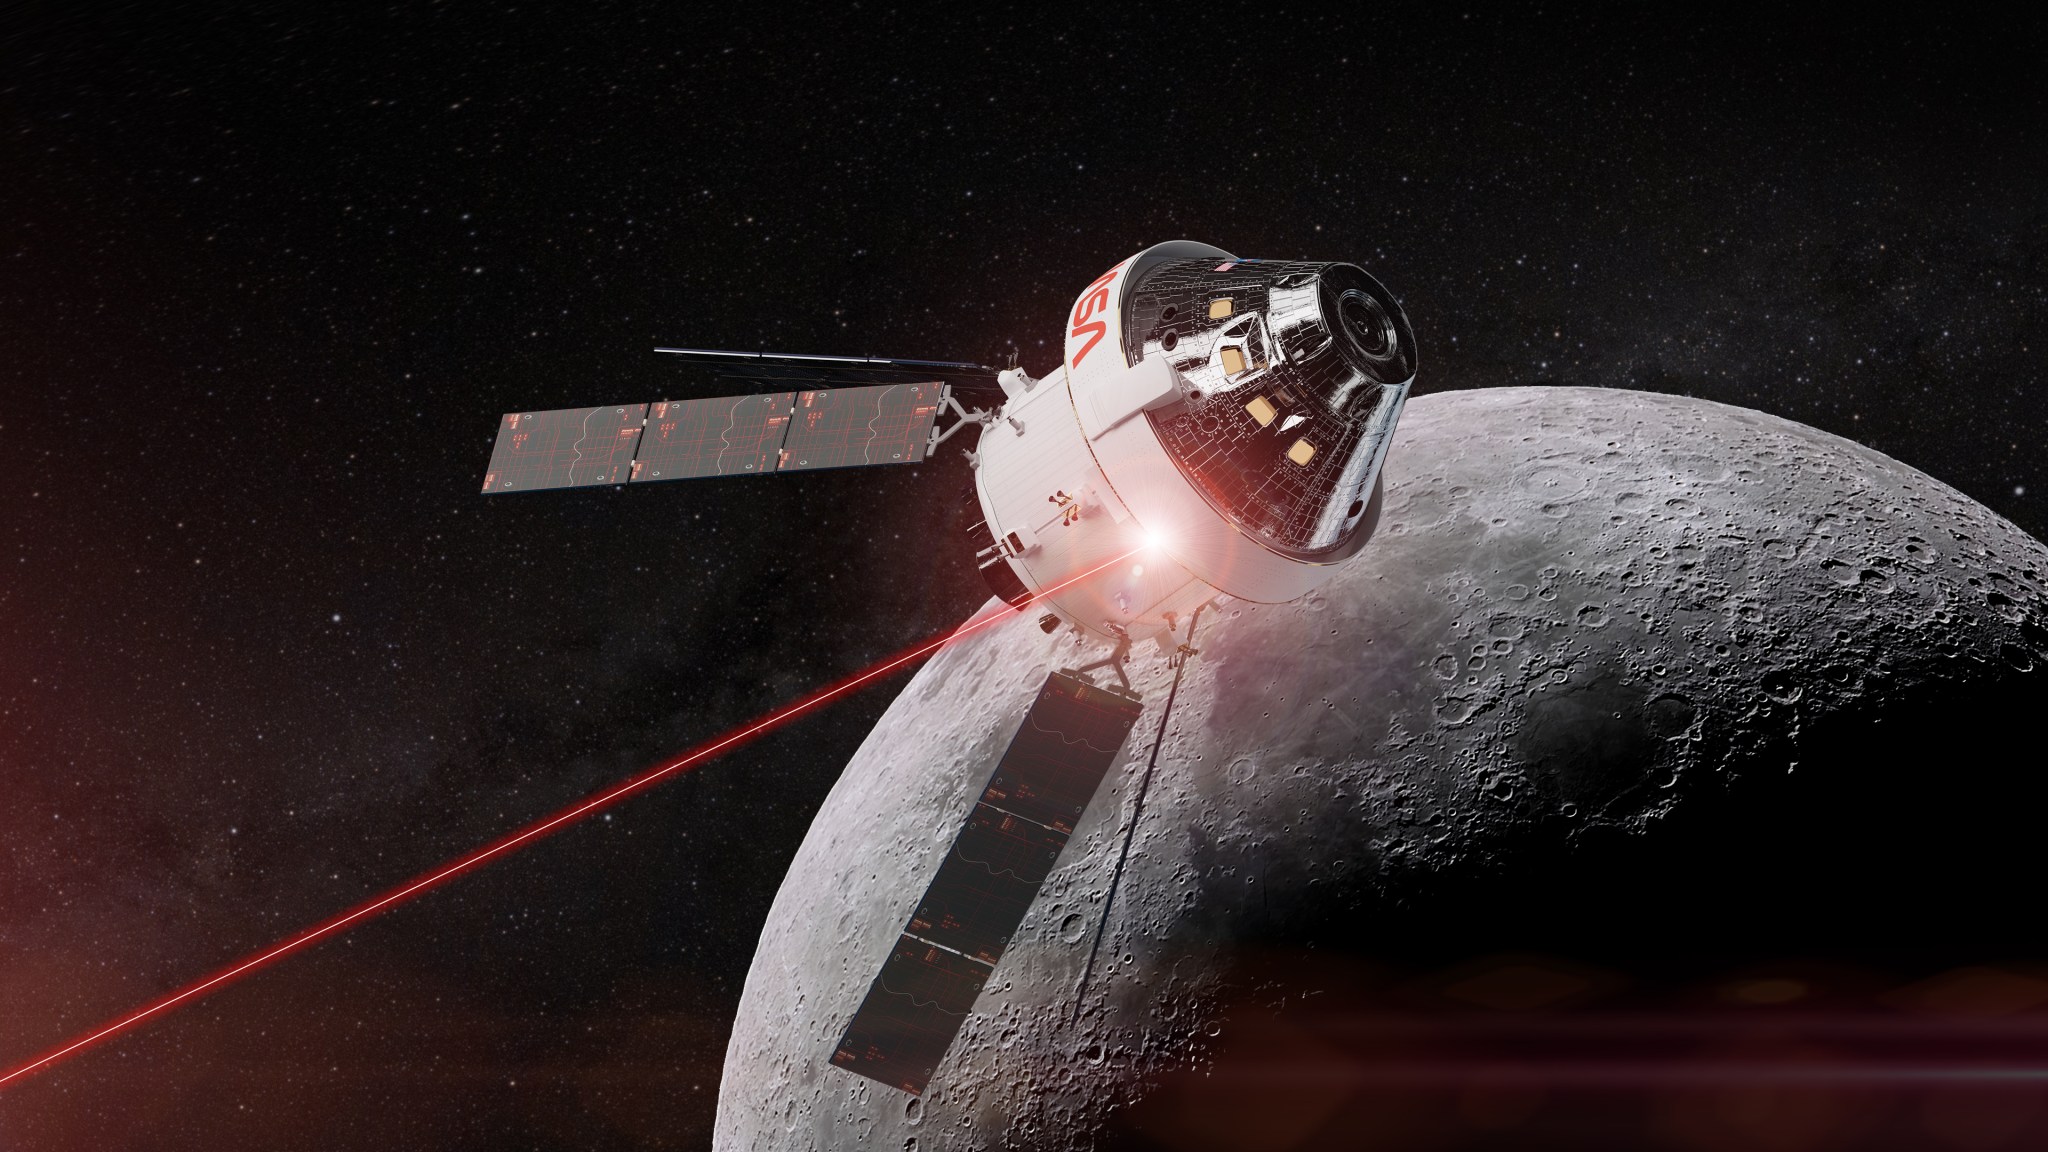 An artist’s illustration of NASA’s Orion spacecraft, a silver and white spaceship with four solar panels, flying through space. A glowing red beam of light, representing laser communications, is seen projecting from the body of the spacecraft and travels off screen. The shadowed crater-filled surface of the Moon is shown behind the spacecraft. A dark grey space scene covered with subtle stars fills the background.